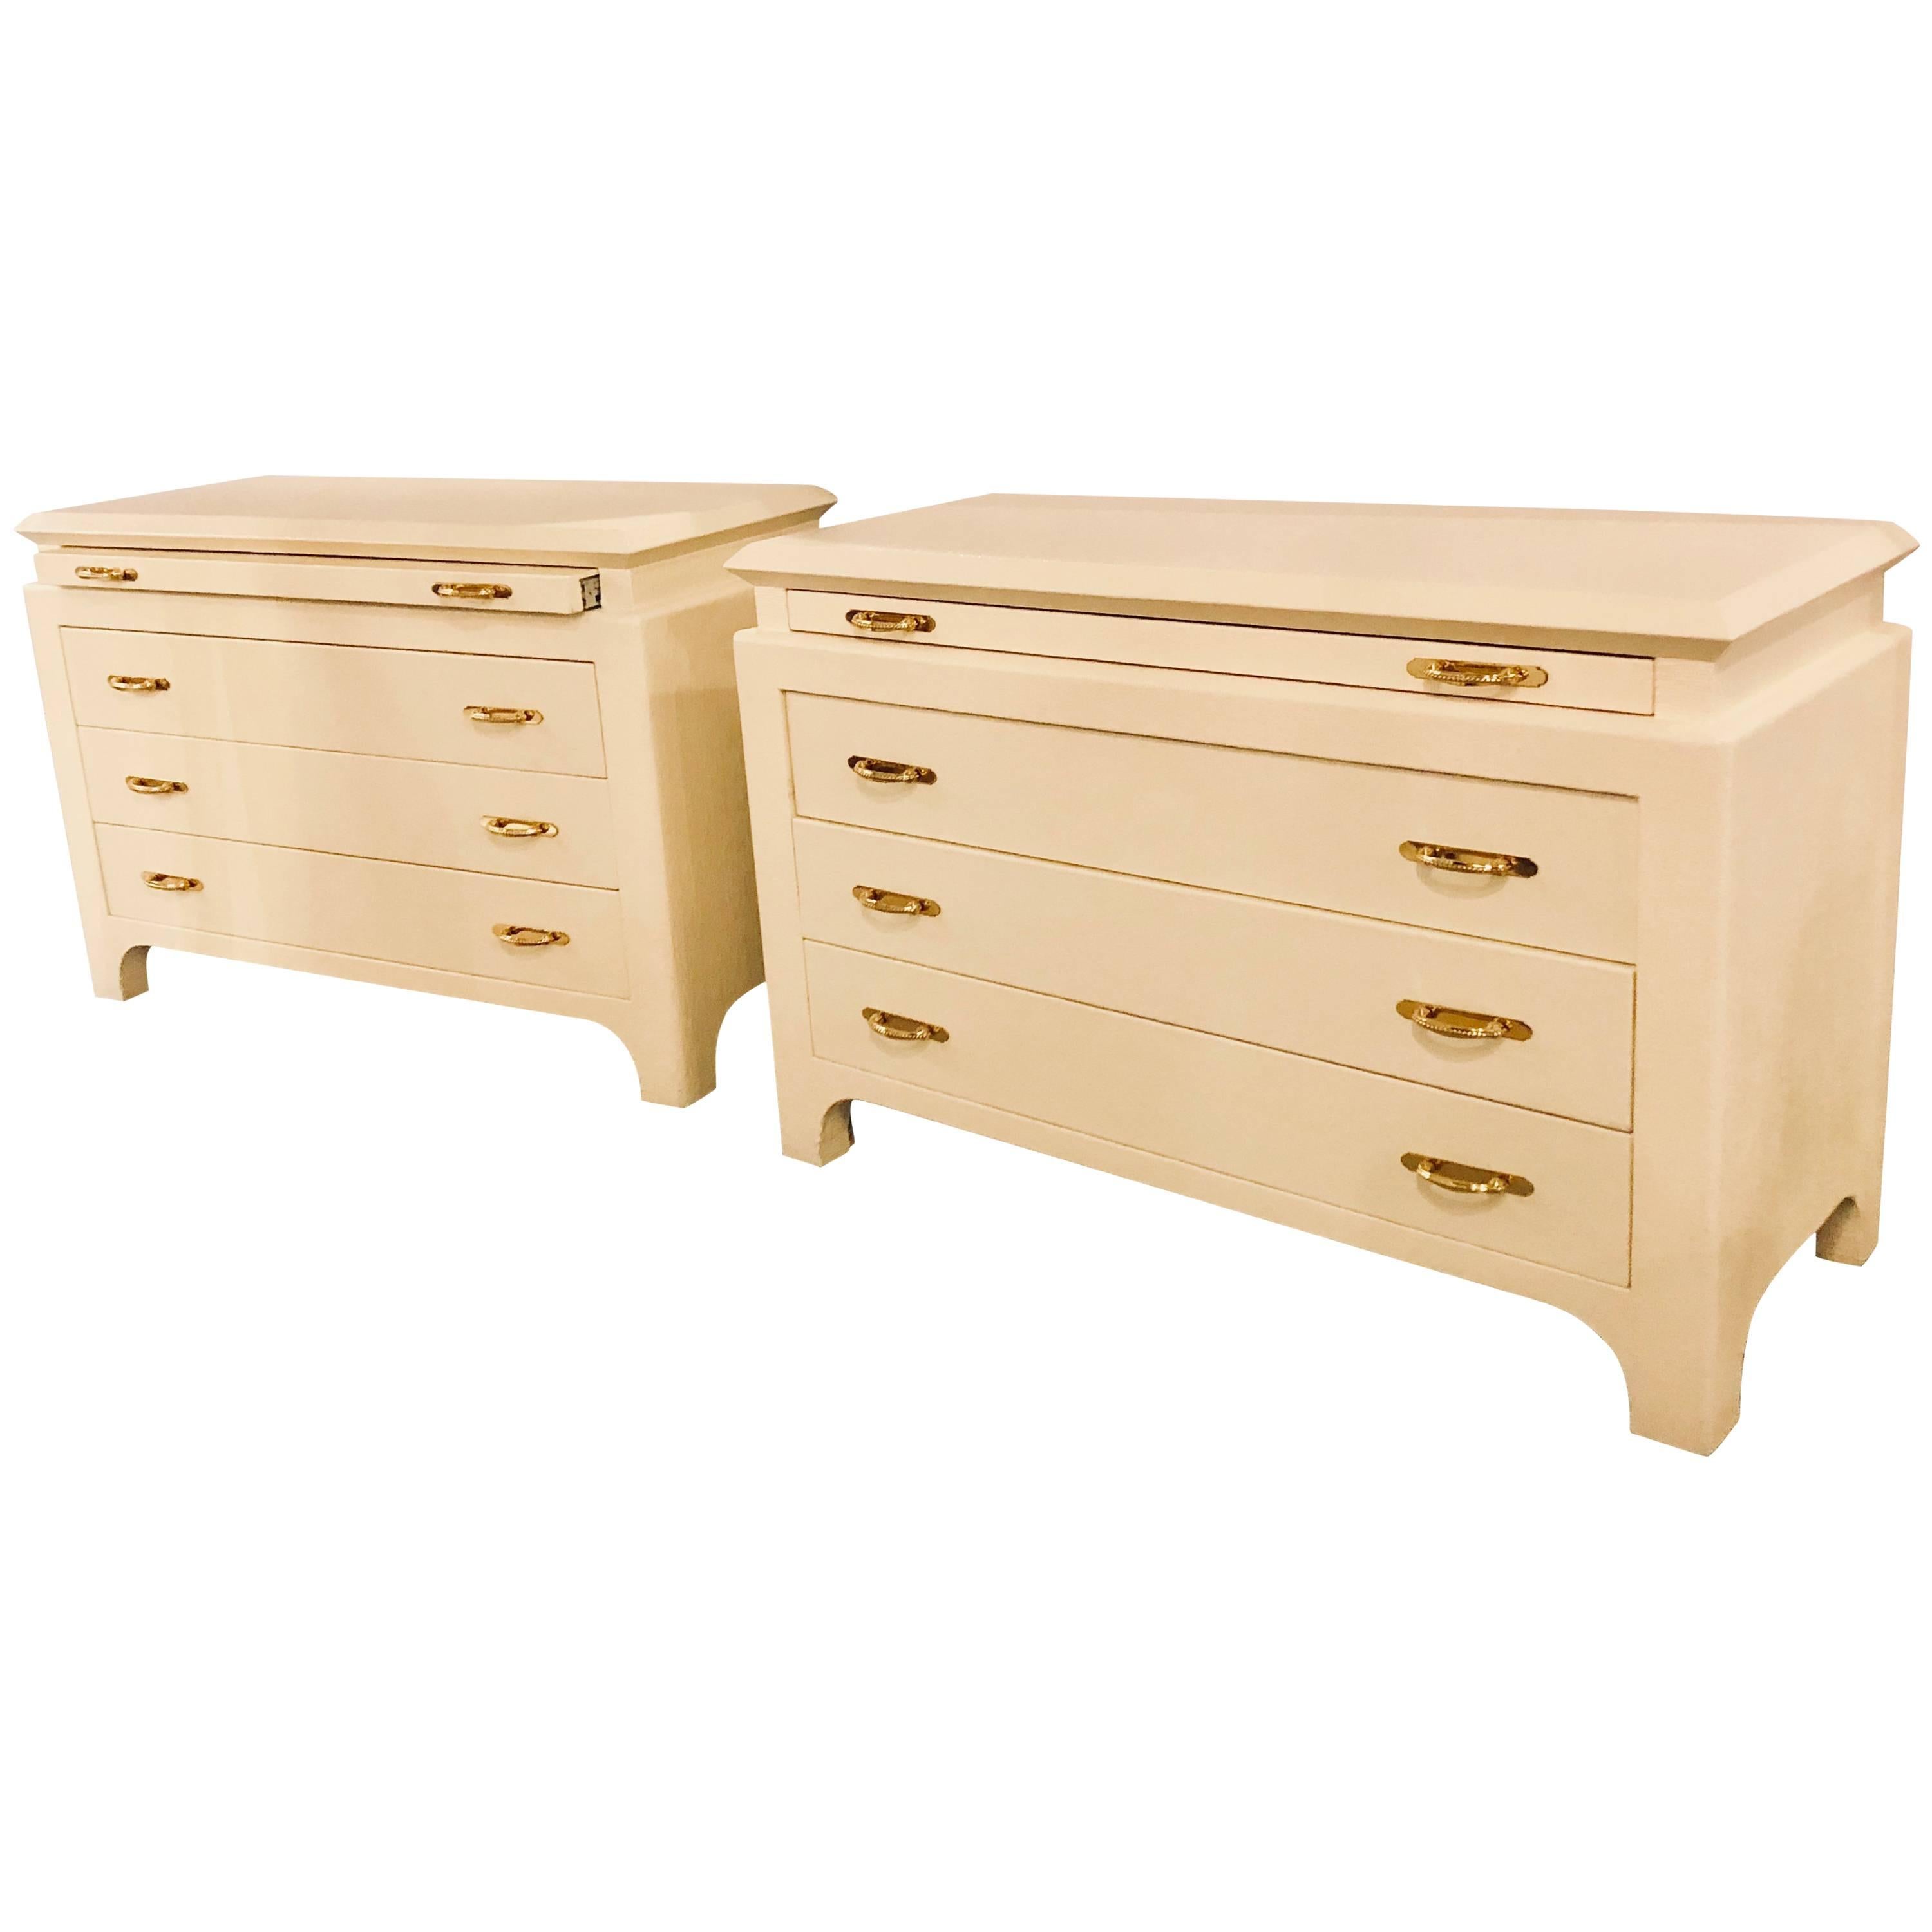 Pair of Custom Quality Commodes or Chests Linen Wrapped